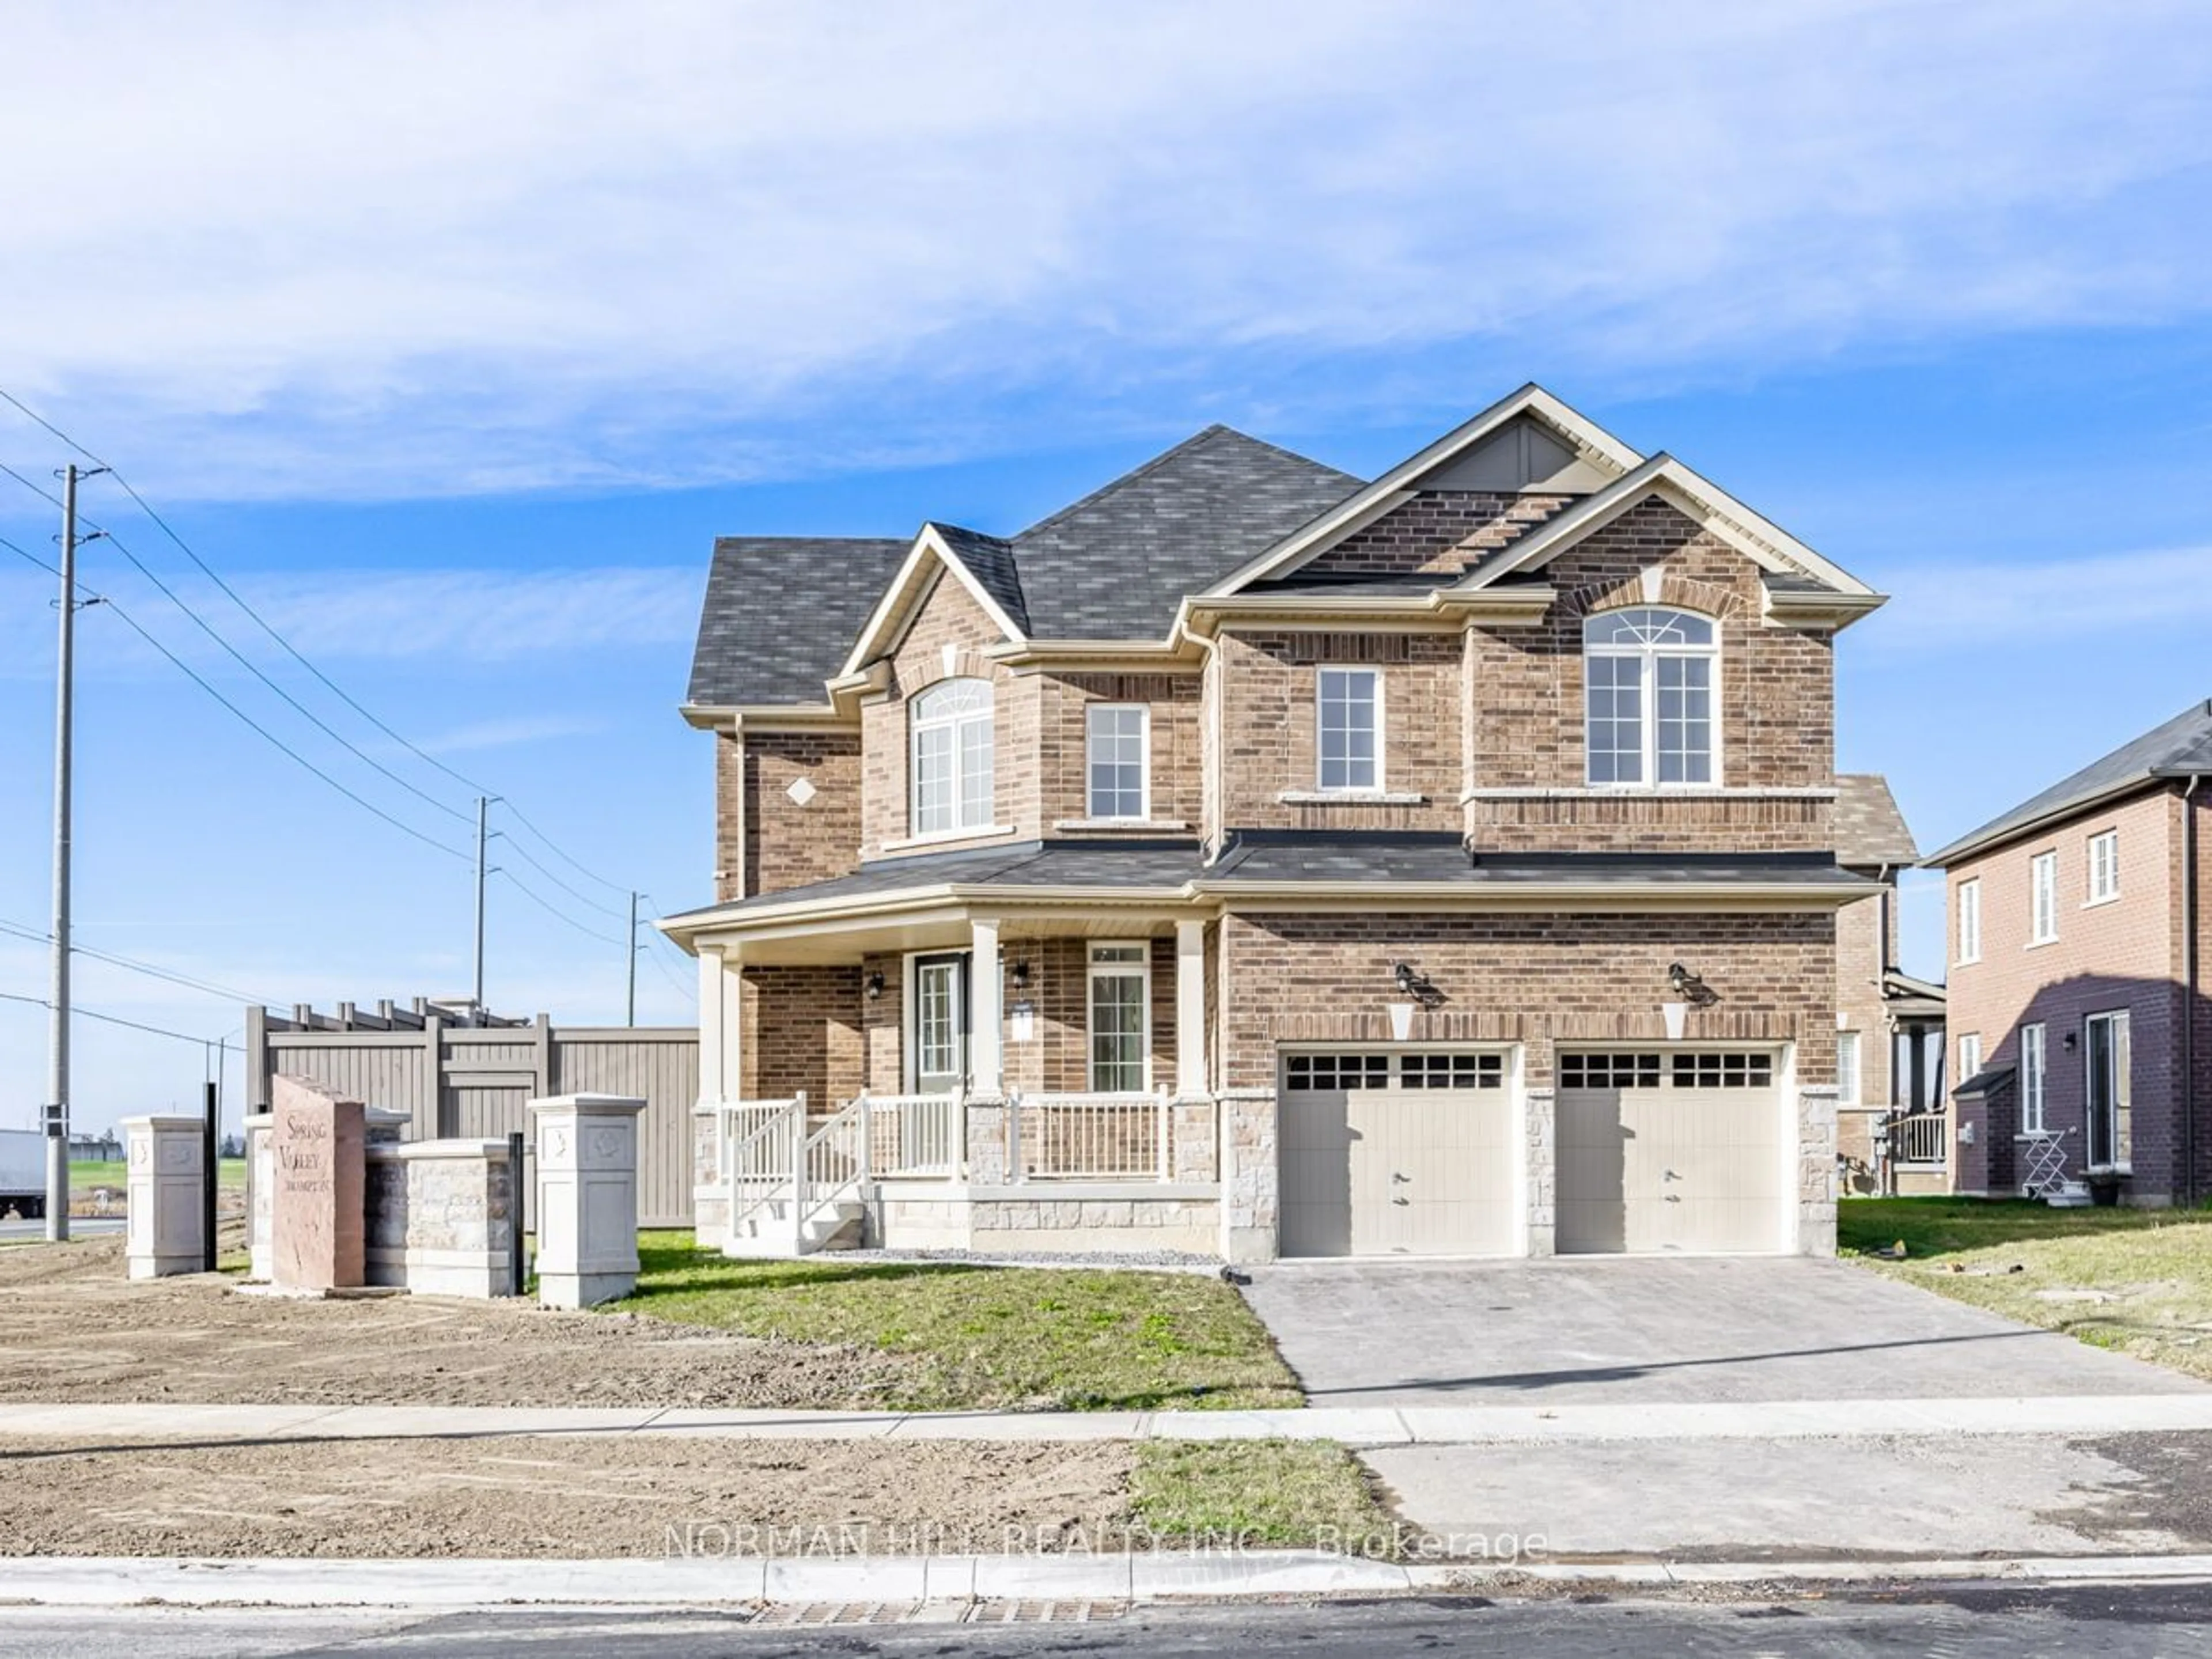 Home with brick exterior material for 433 Royal West Dr, Brampton Ontario L6X 0B3